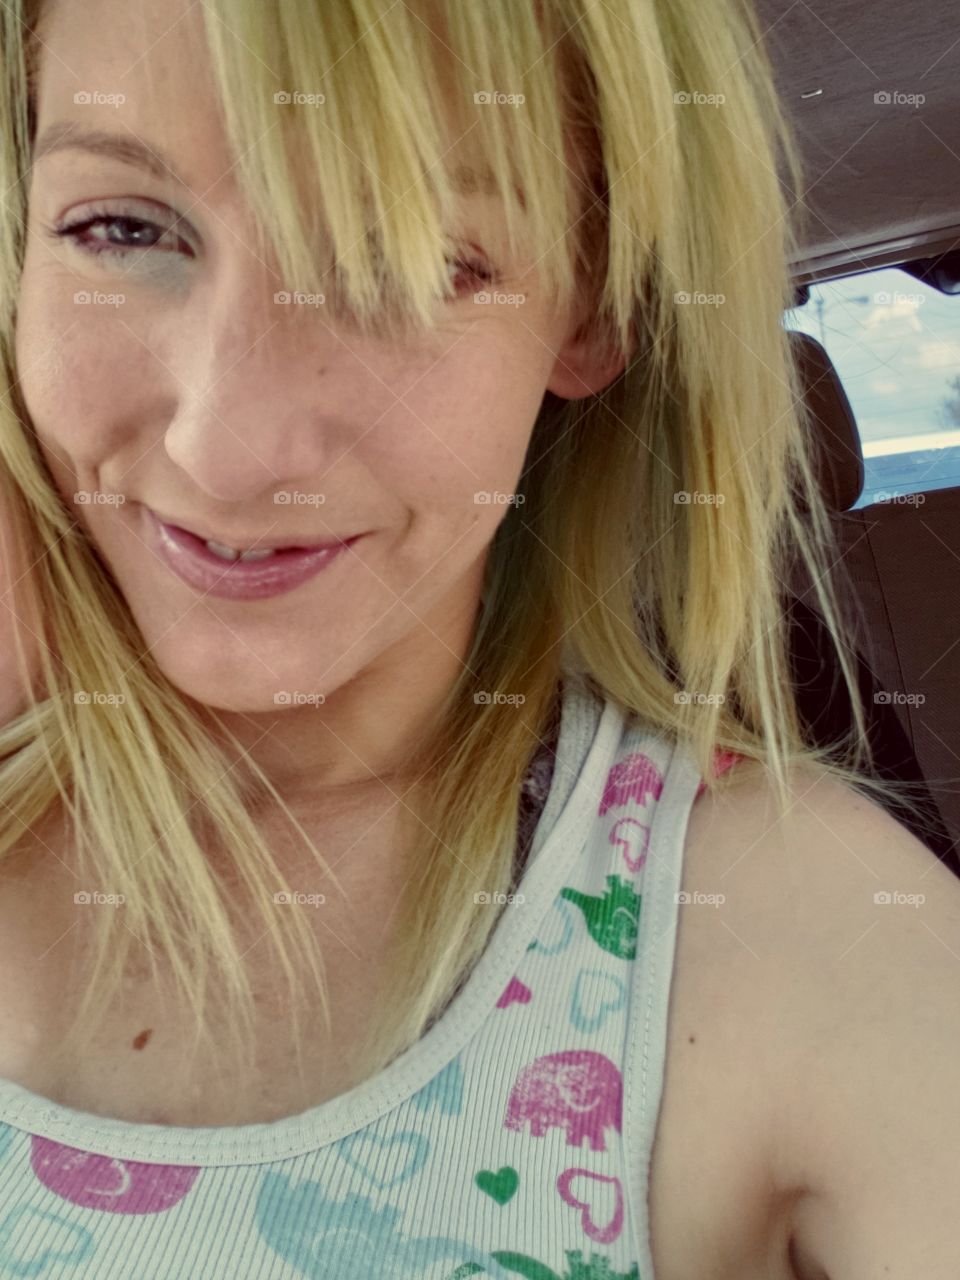 selfie friday, I guess. blue eyes and blue & blonde hair <3